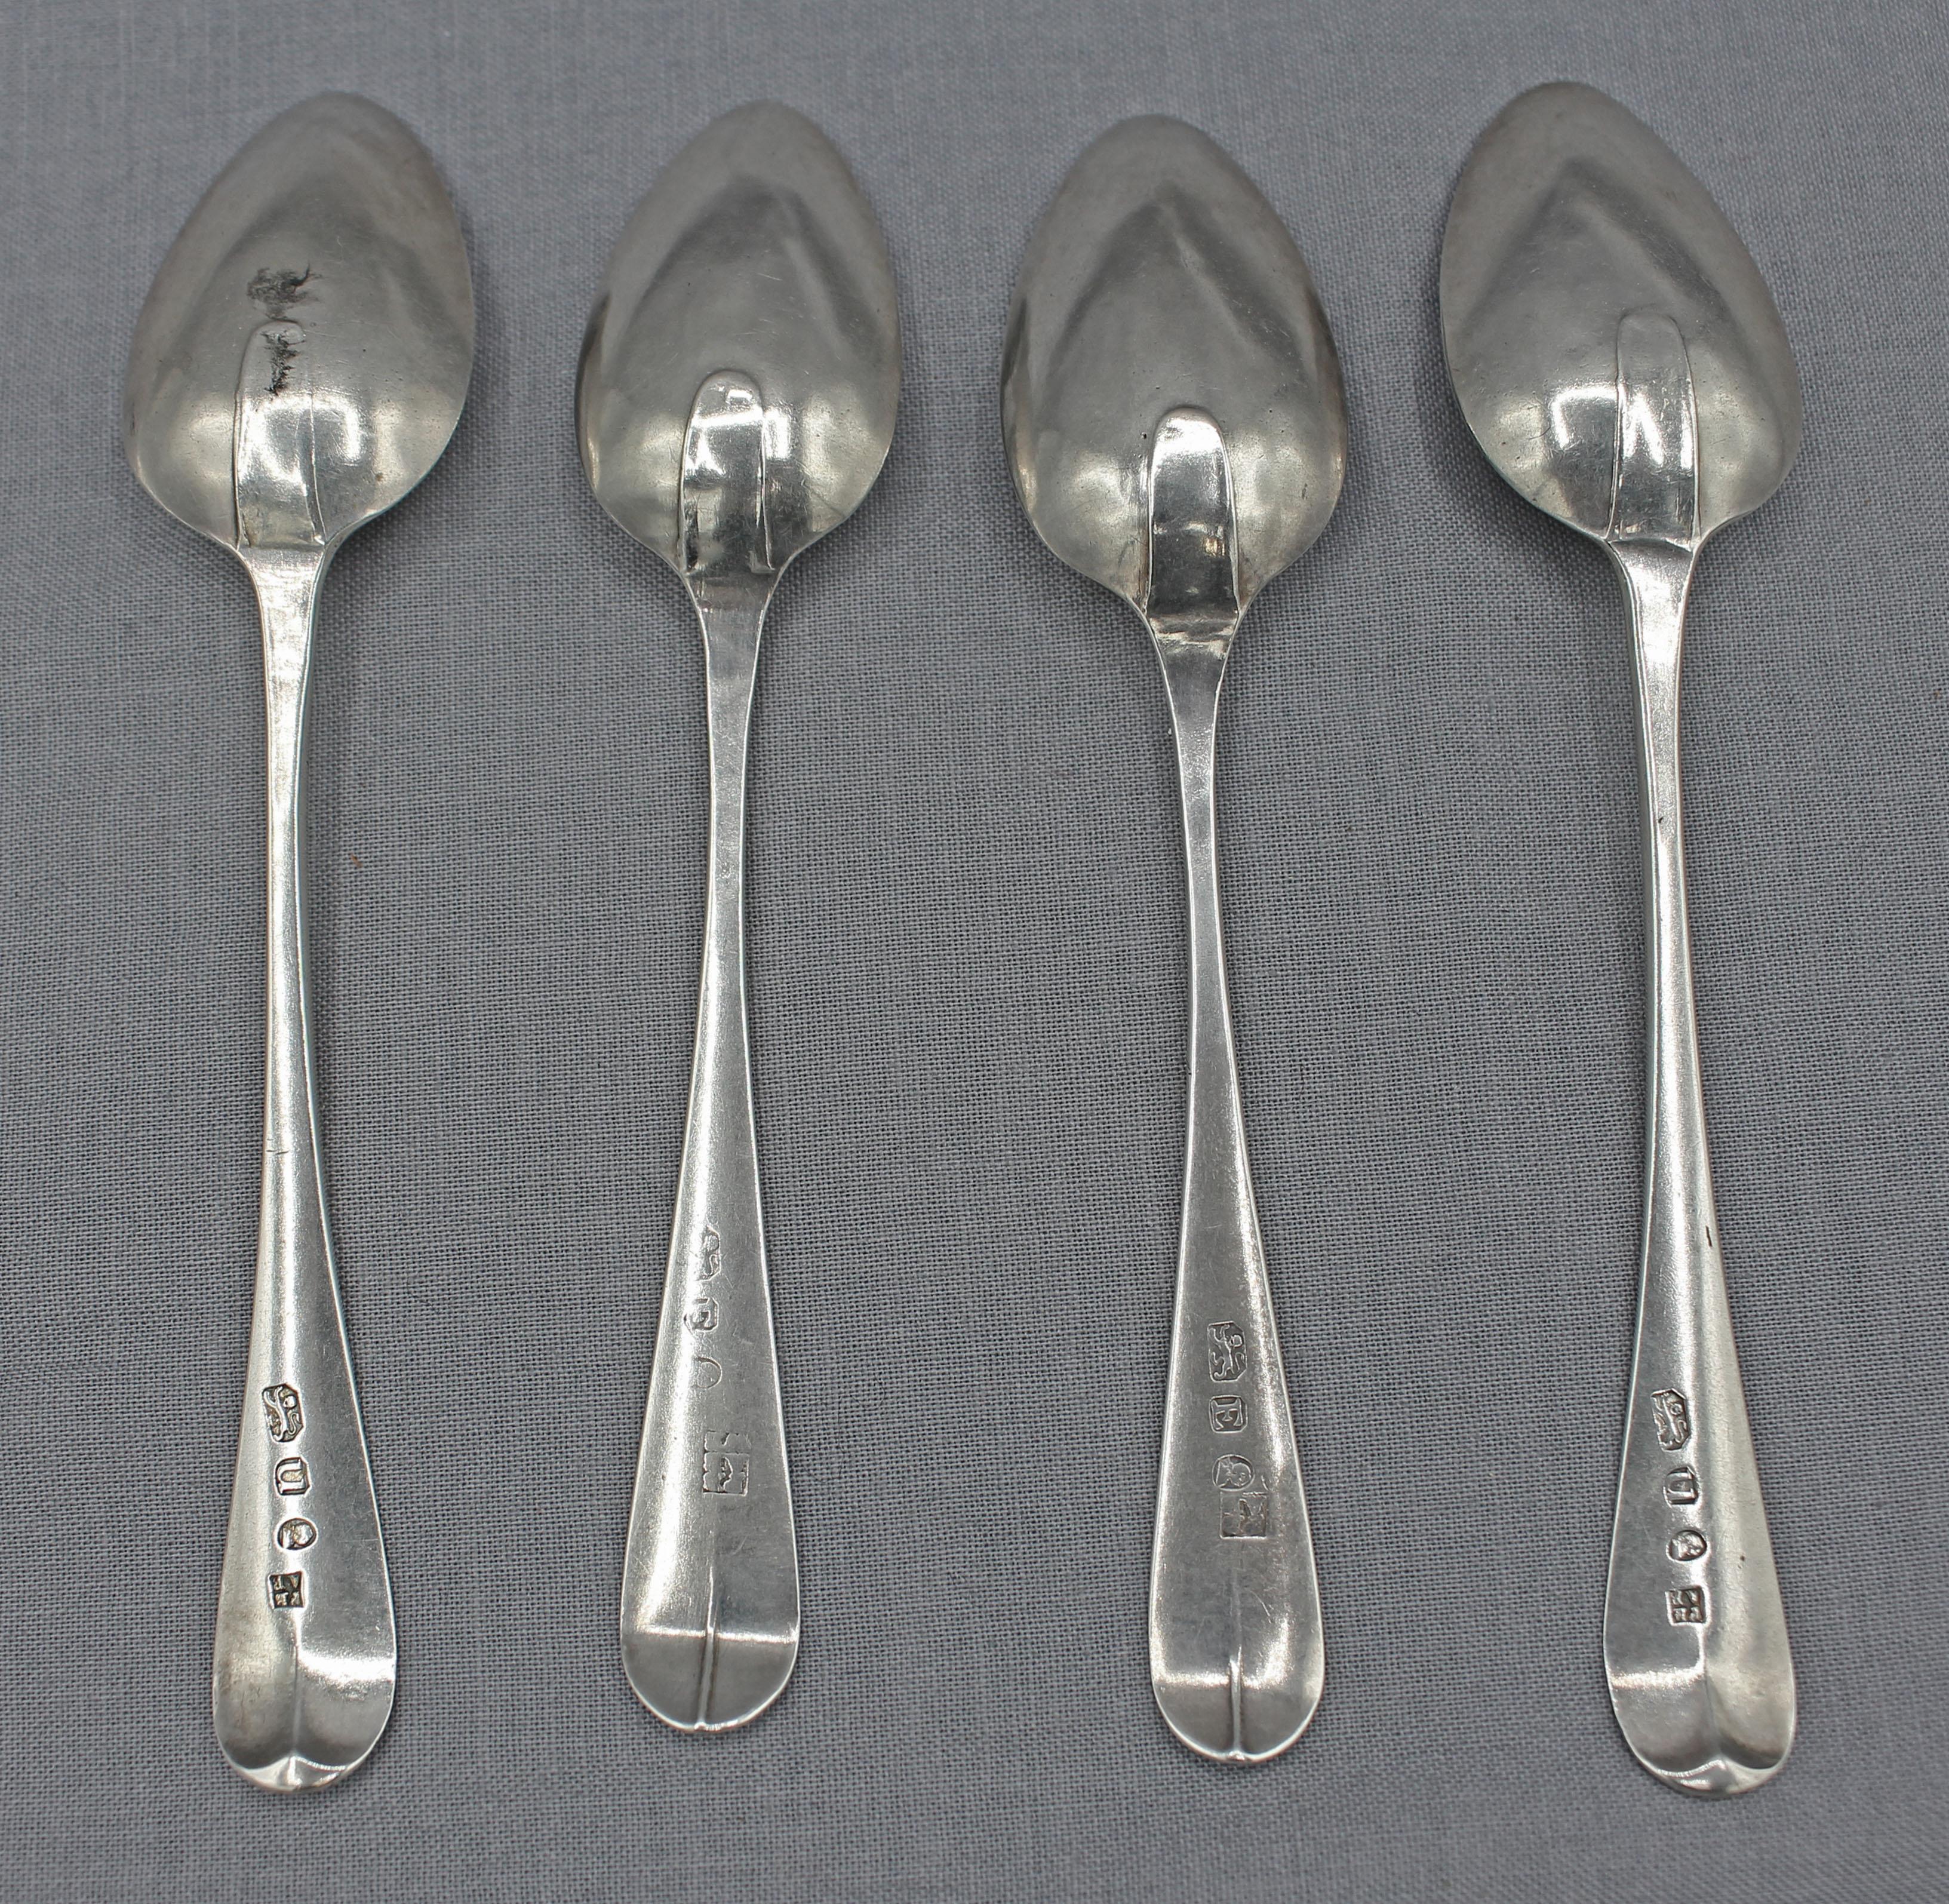 Assembled set of 4 coffee sterling spoons by the Bateman family, London, 1795 & 1800. Two are by Peter, Ann & William in 1800 and 2 are by Peter & Ann in 1795. All monograms are 